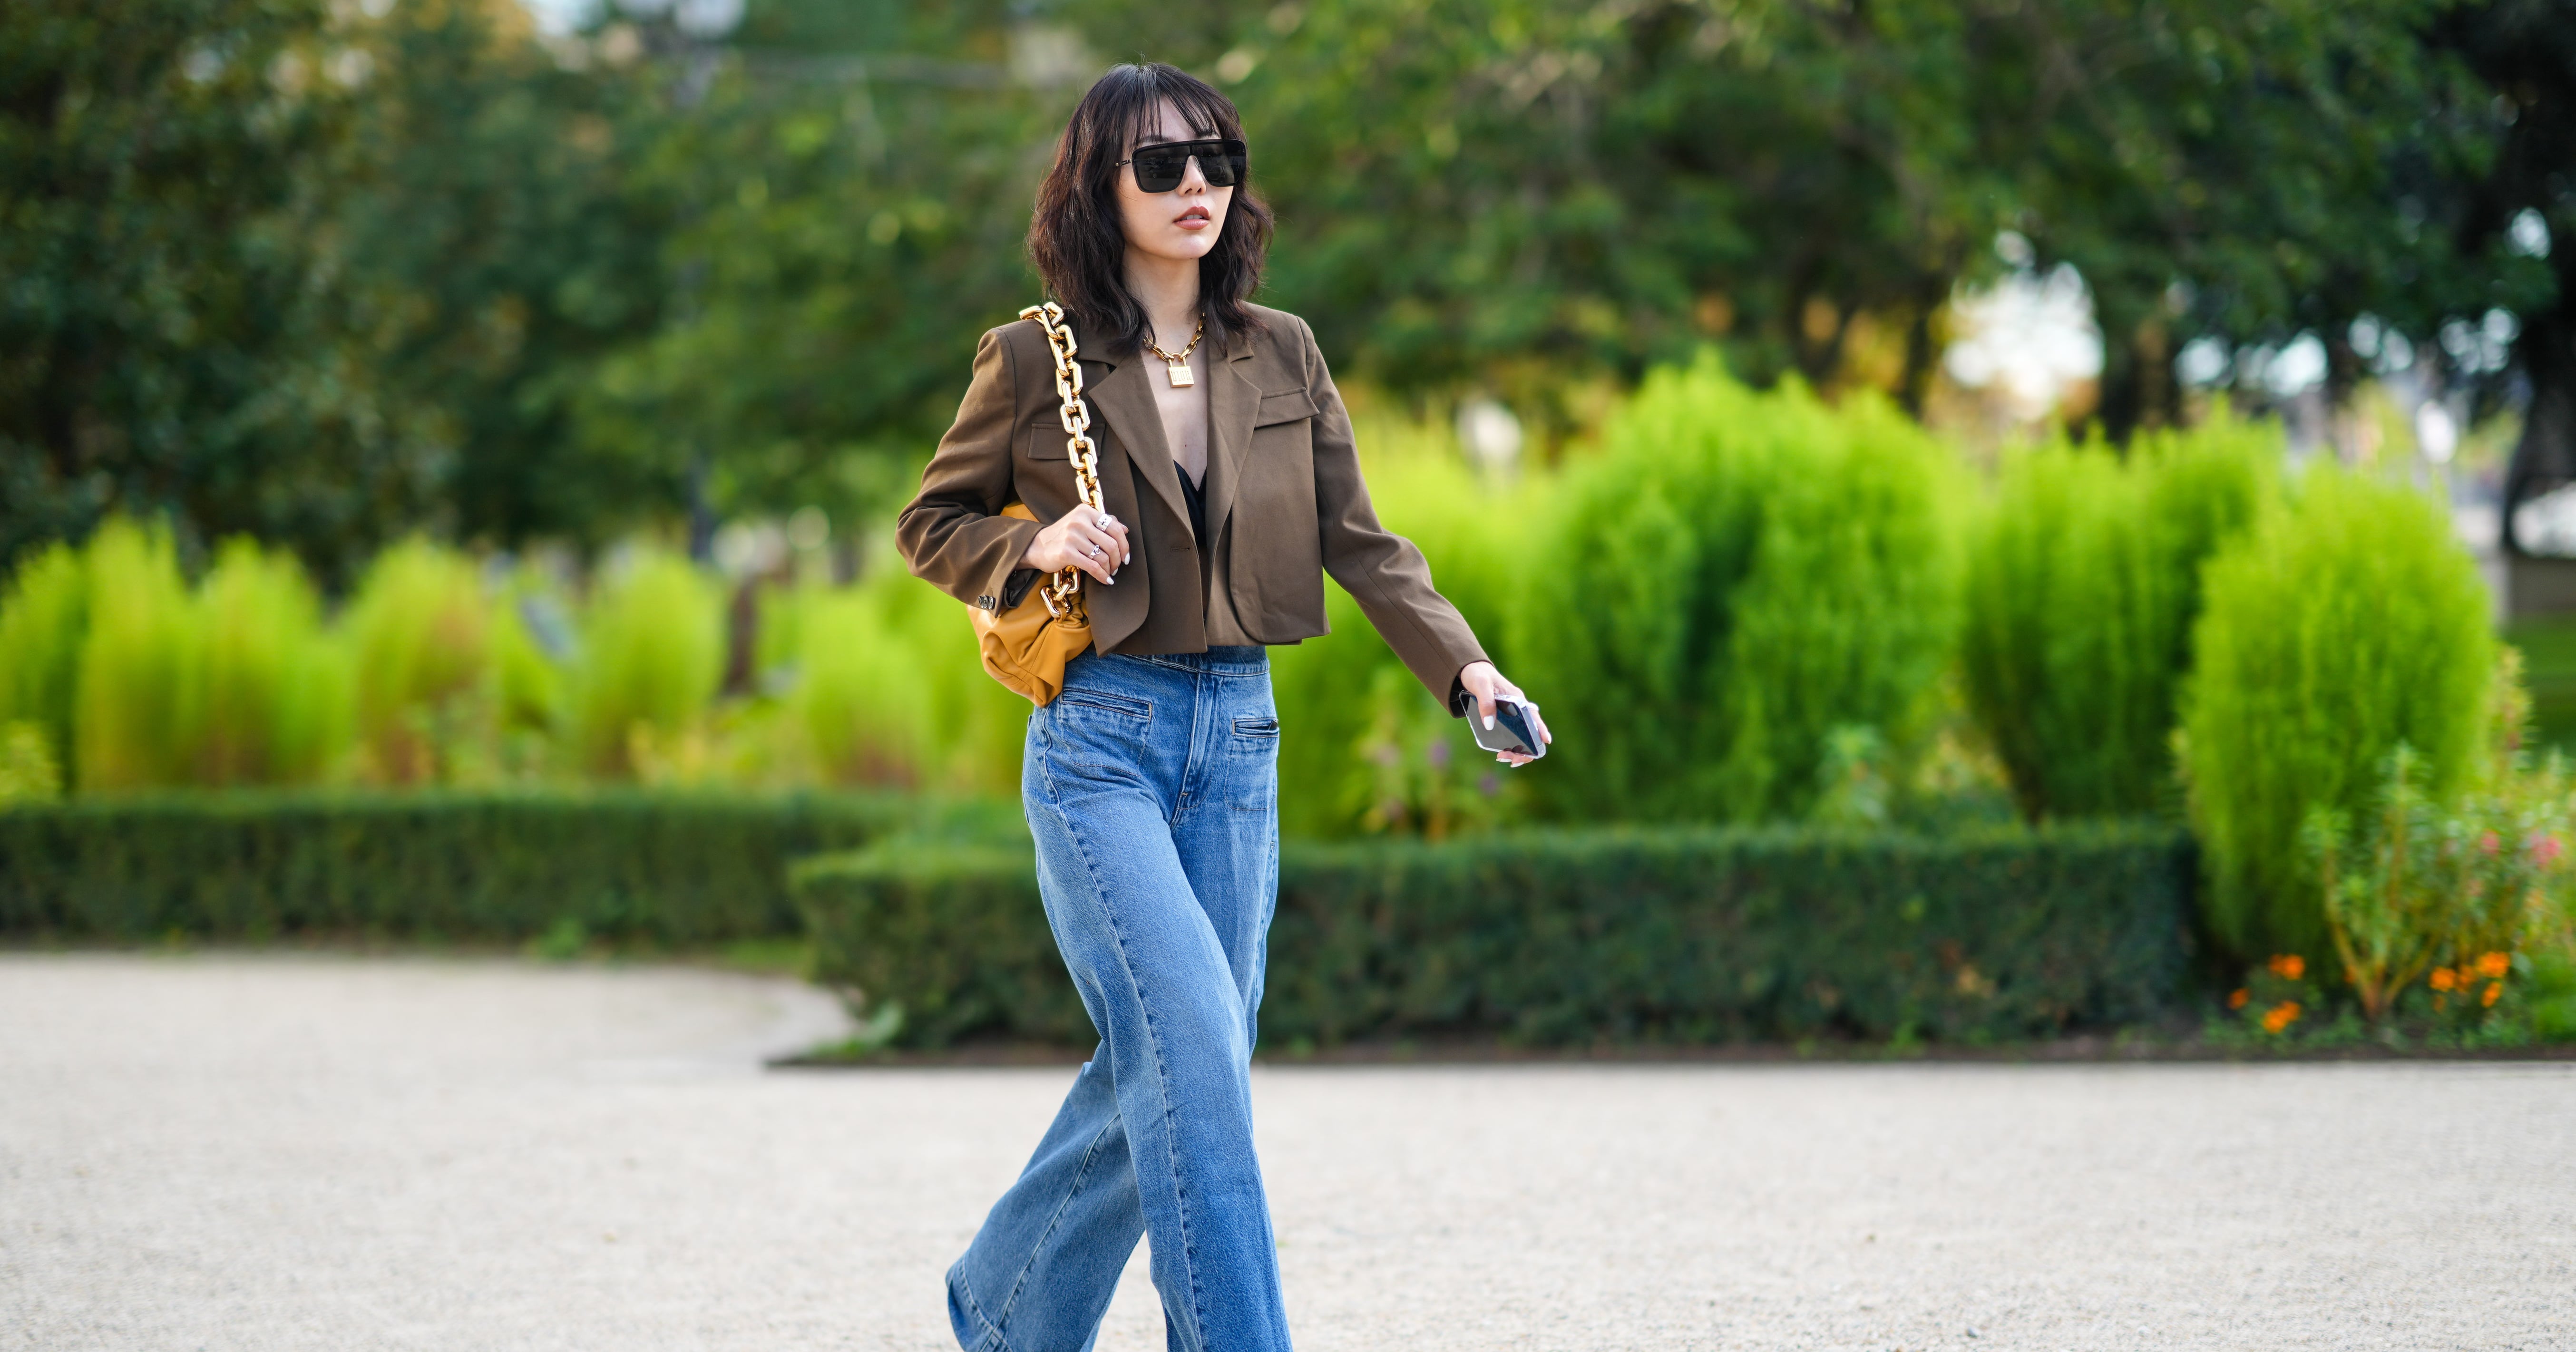 The 10 Best Gap Jeans For Every Aesthetic, From Classic to Trendy